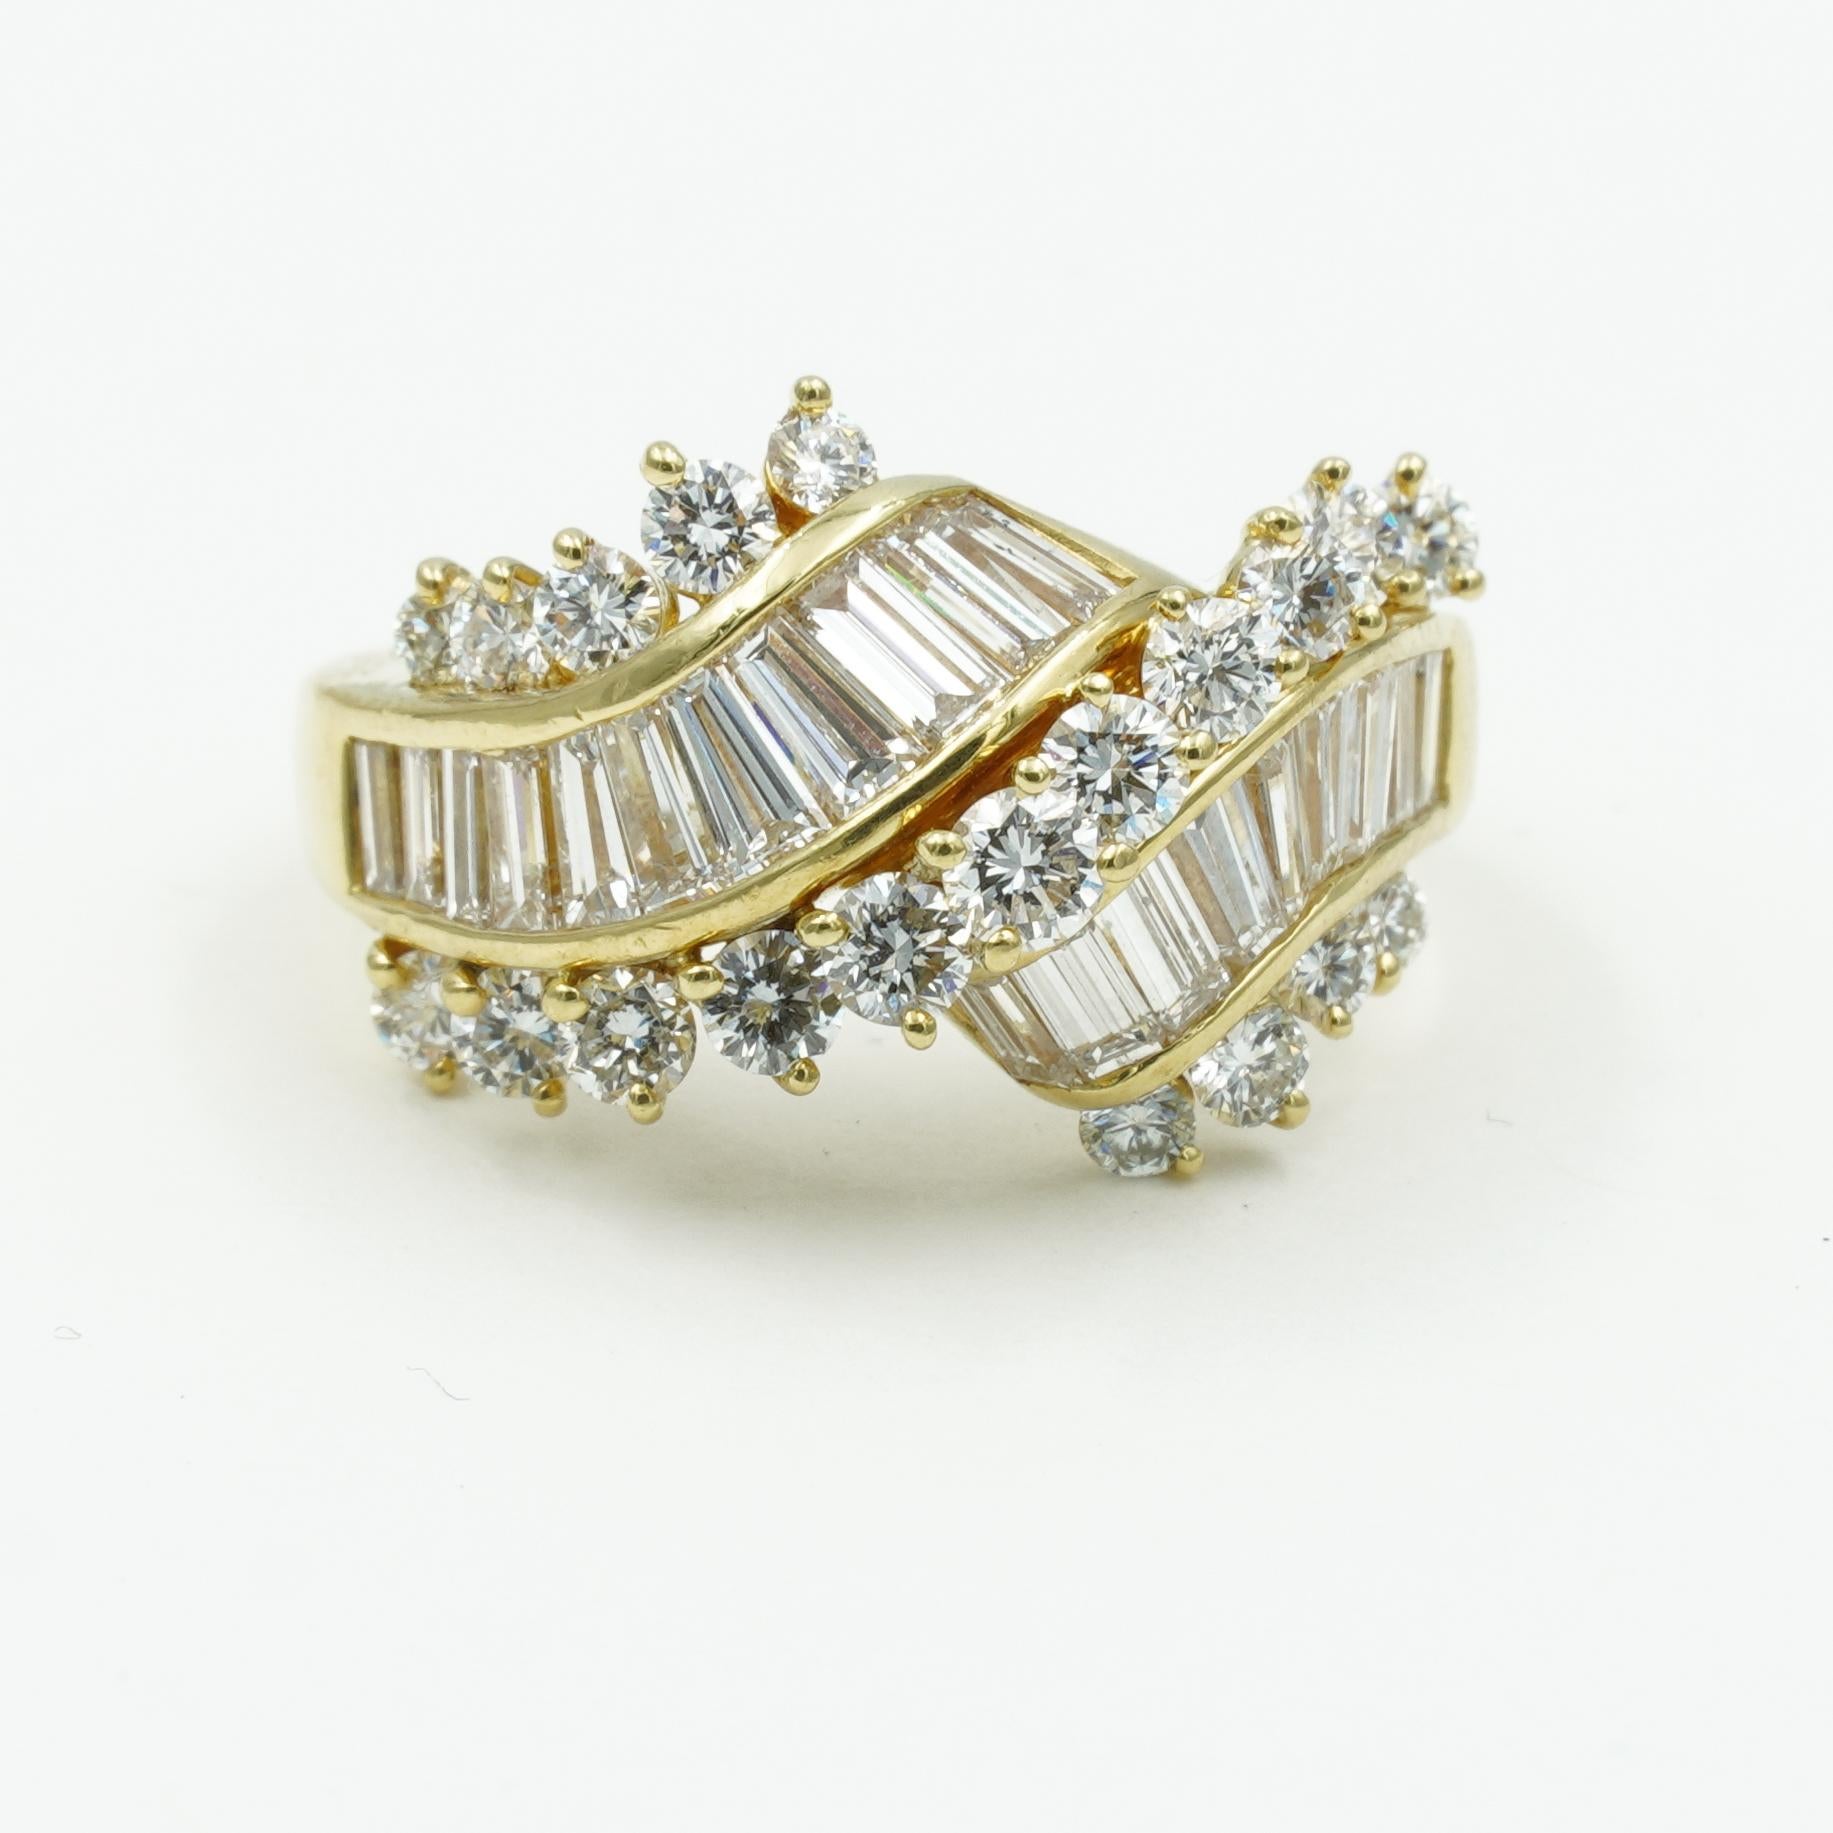 Designed by Kurt Wayne, this vintage cocktail ring is the perfect statement piece for your jewelry wardrobe. It contains a total of 18 baguette diamonds and 19 round brilliant cut diamonds totaling 2.40 carats throughout the ring. The diamonds are